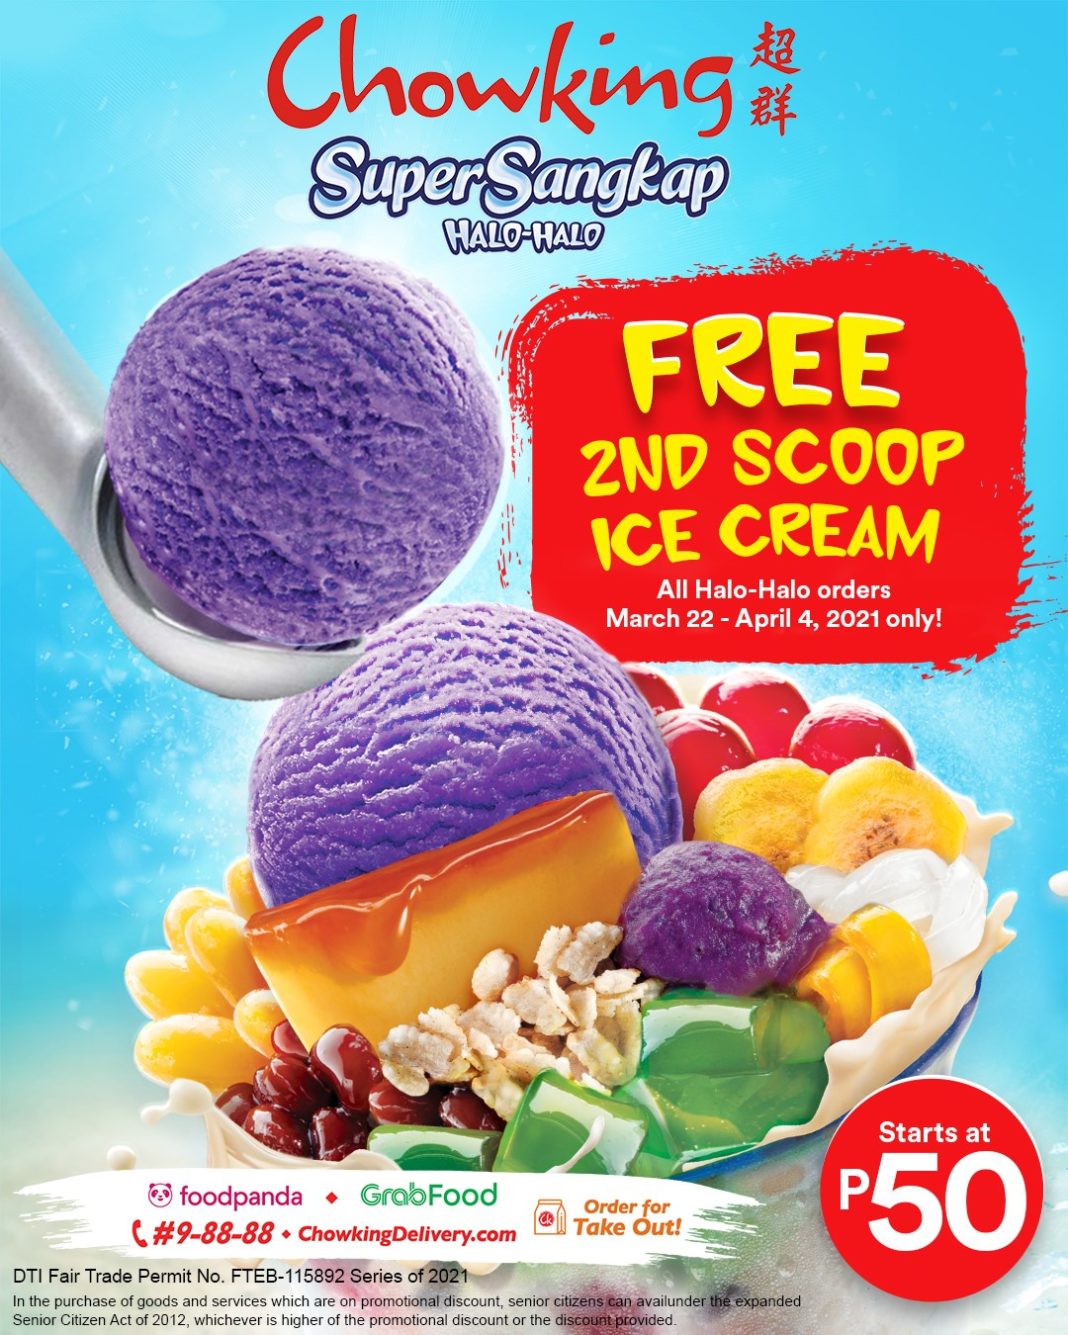 Chowking Halo Halo FREE 2nd Scoop Promo Poster March 2021 1068x1335 